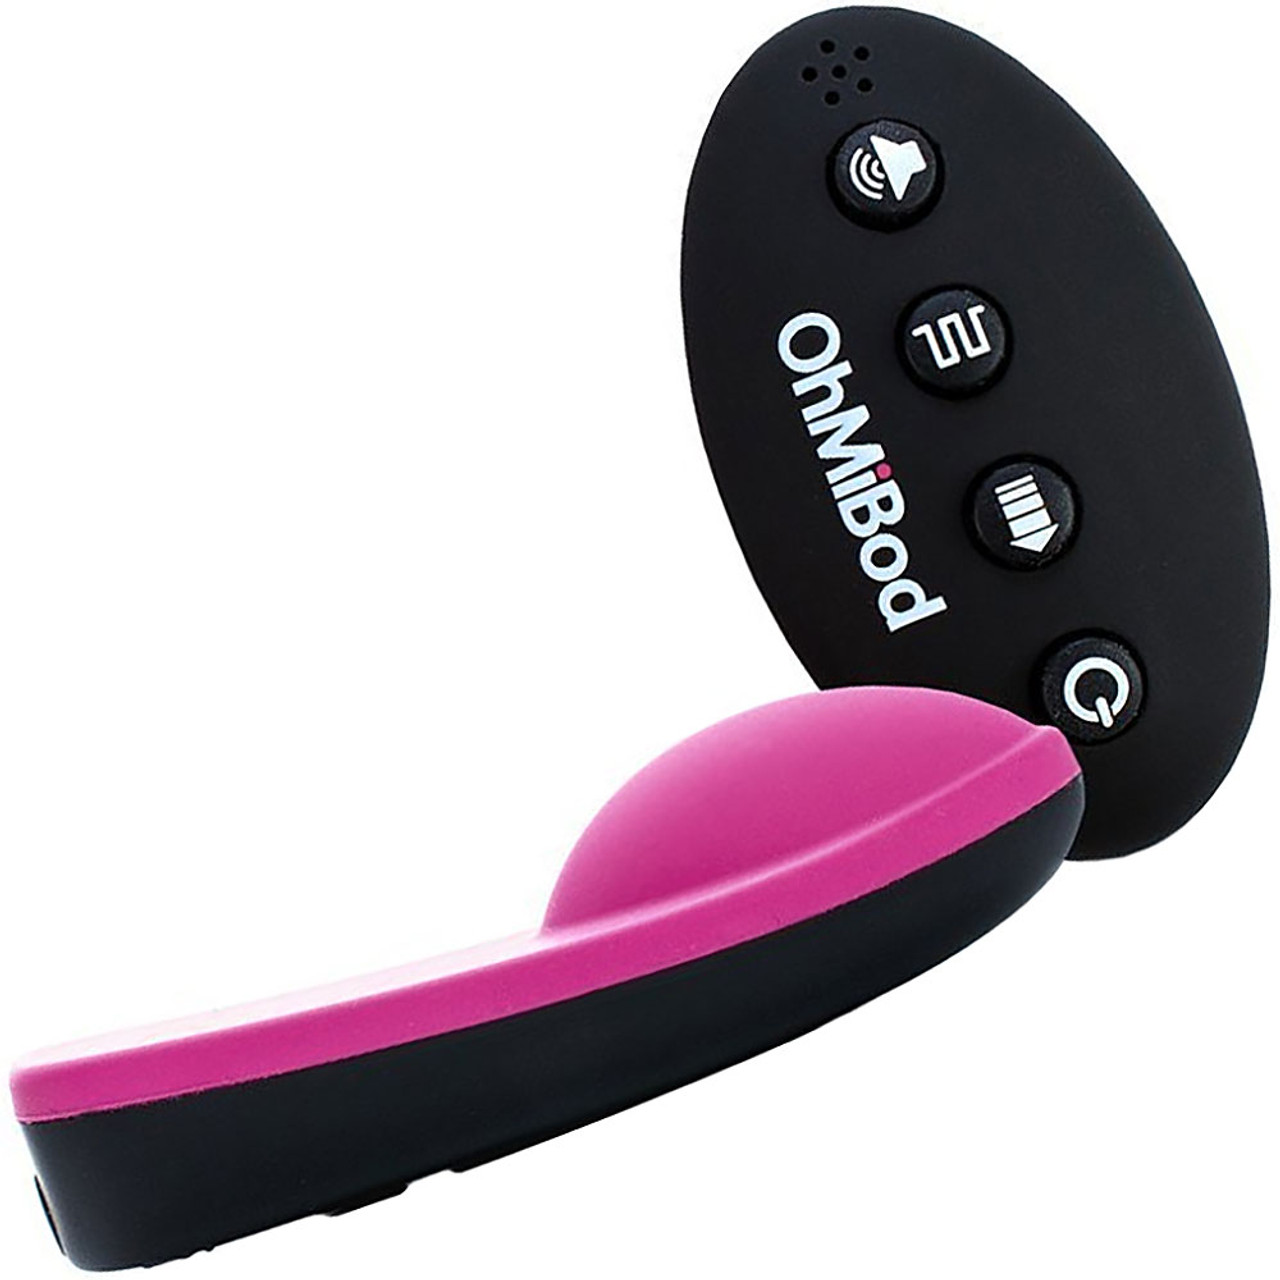 bhuvnesh sehgal recommends Oh My Bod Vibrator